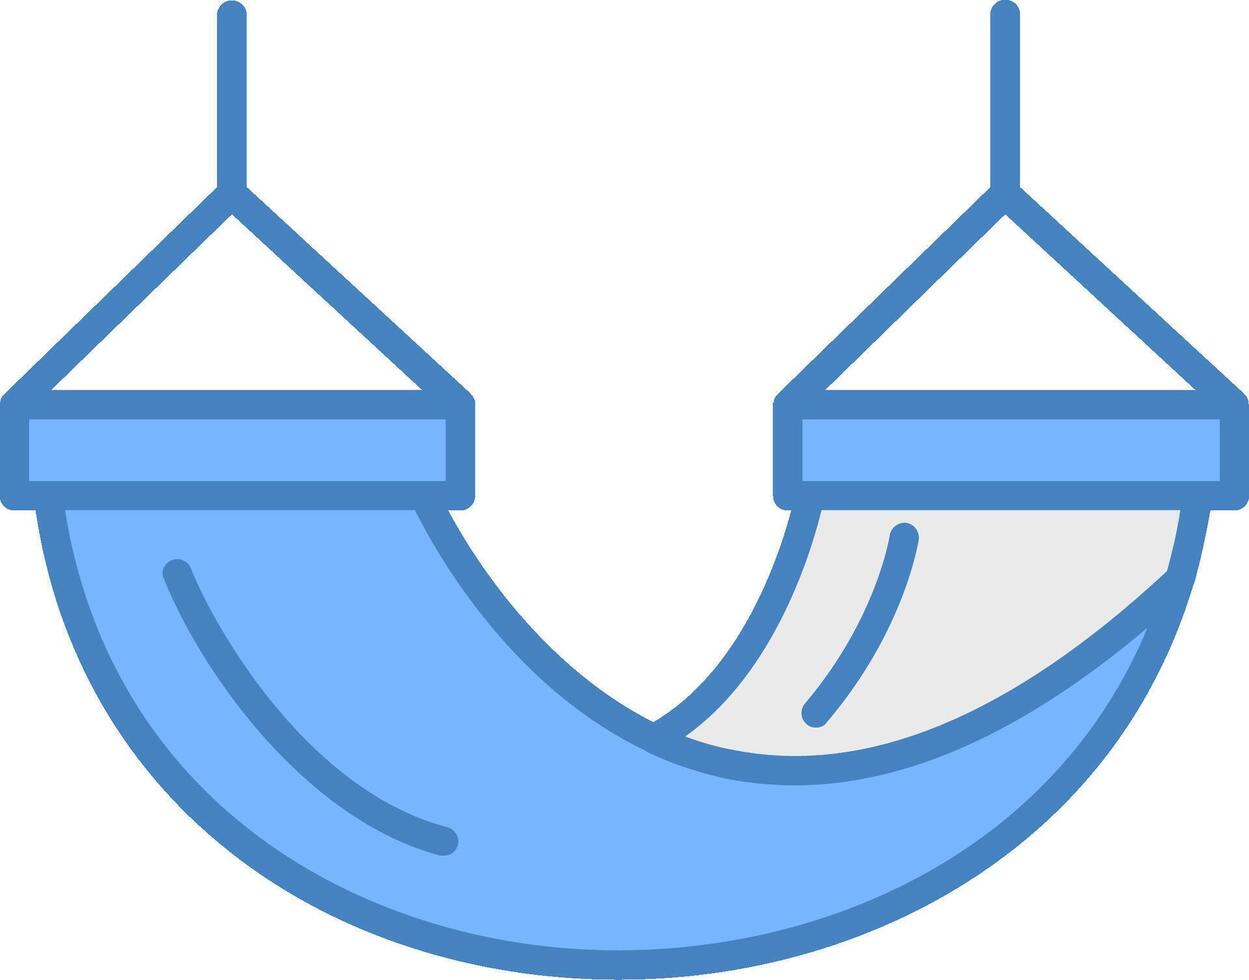 Hammock Line Filled Blue Icon vector